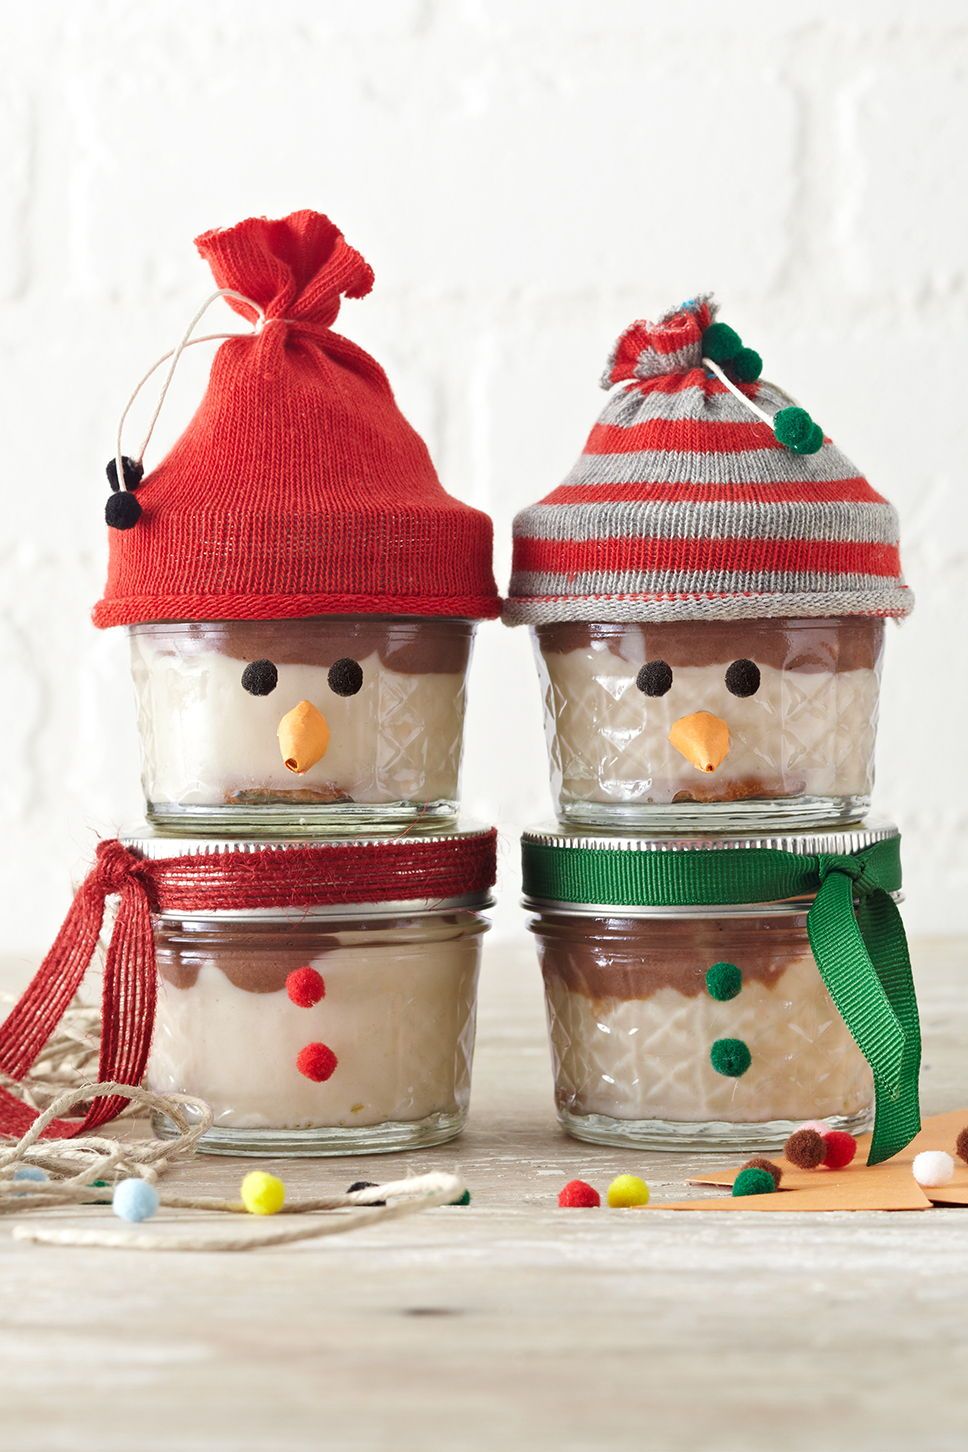 44 DIY Christmas Gifts You'd Want to Receive